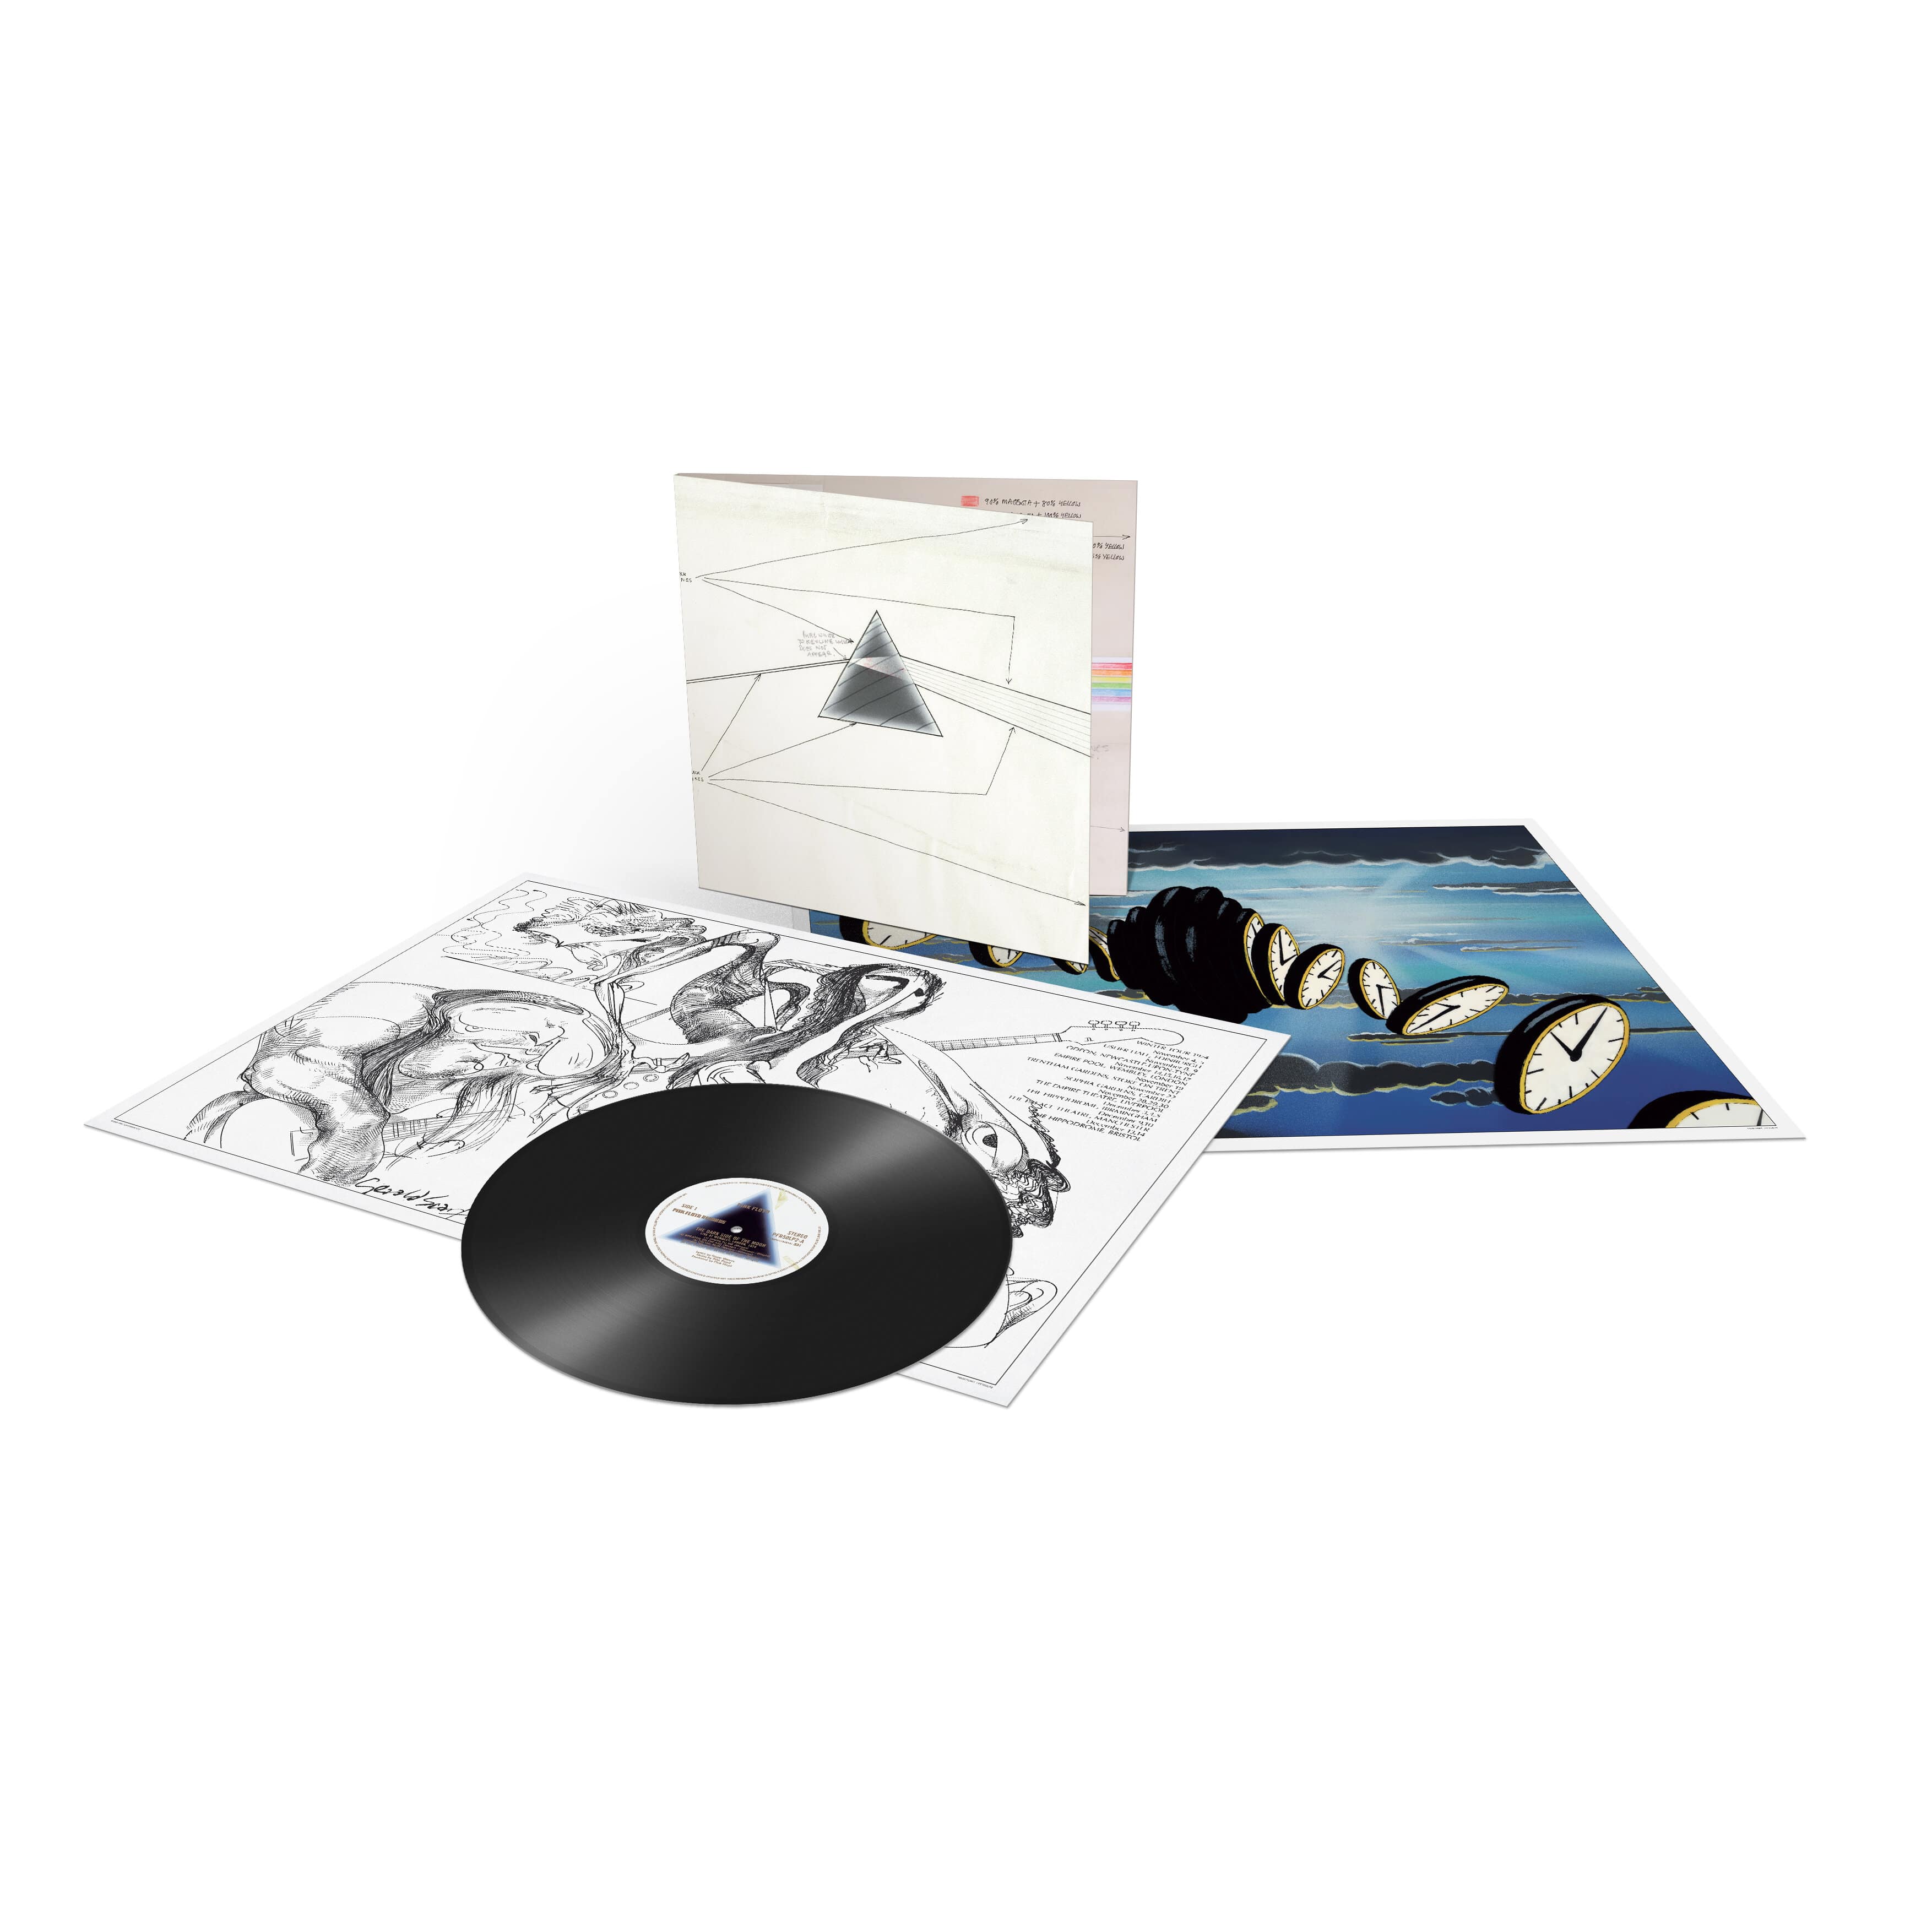 Pink Floyd – The Dark Side Of The Moon (Live At Wembley 1974) LP – The  Noise Music Store